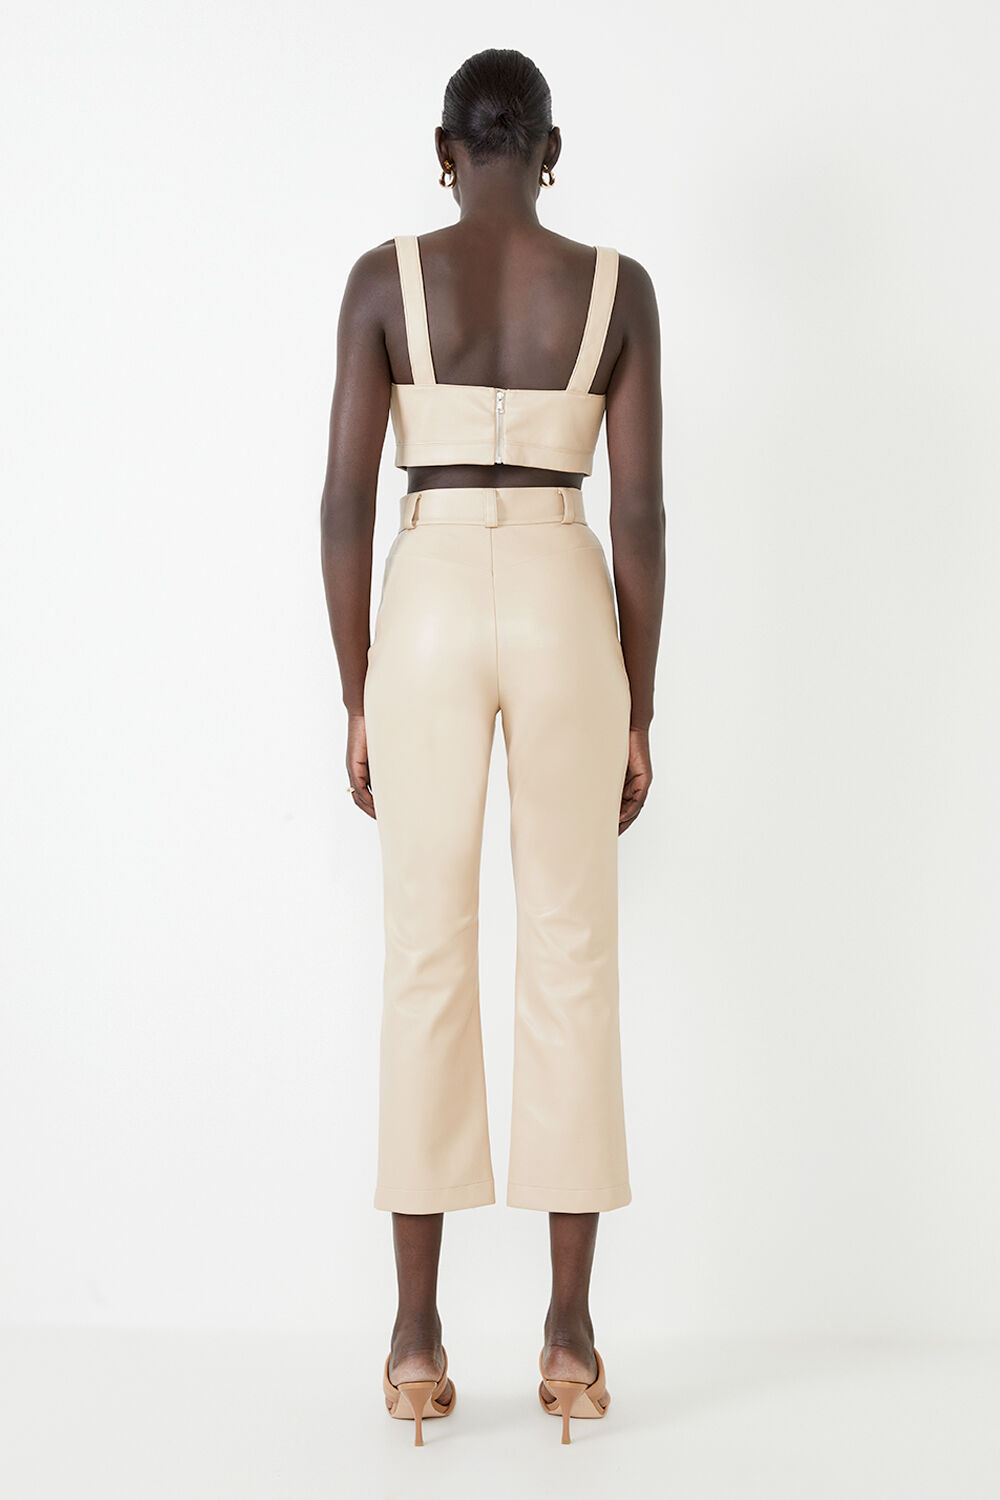 POLLY VEGAN LEATHER PANT in colour MOONLIGHT